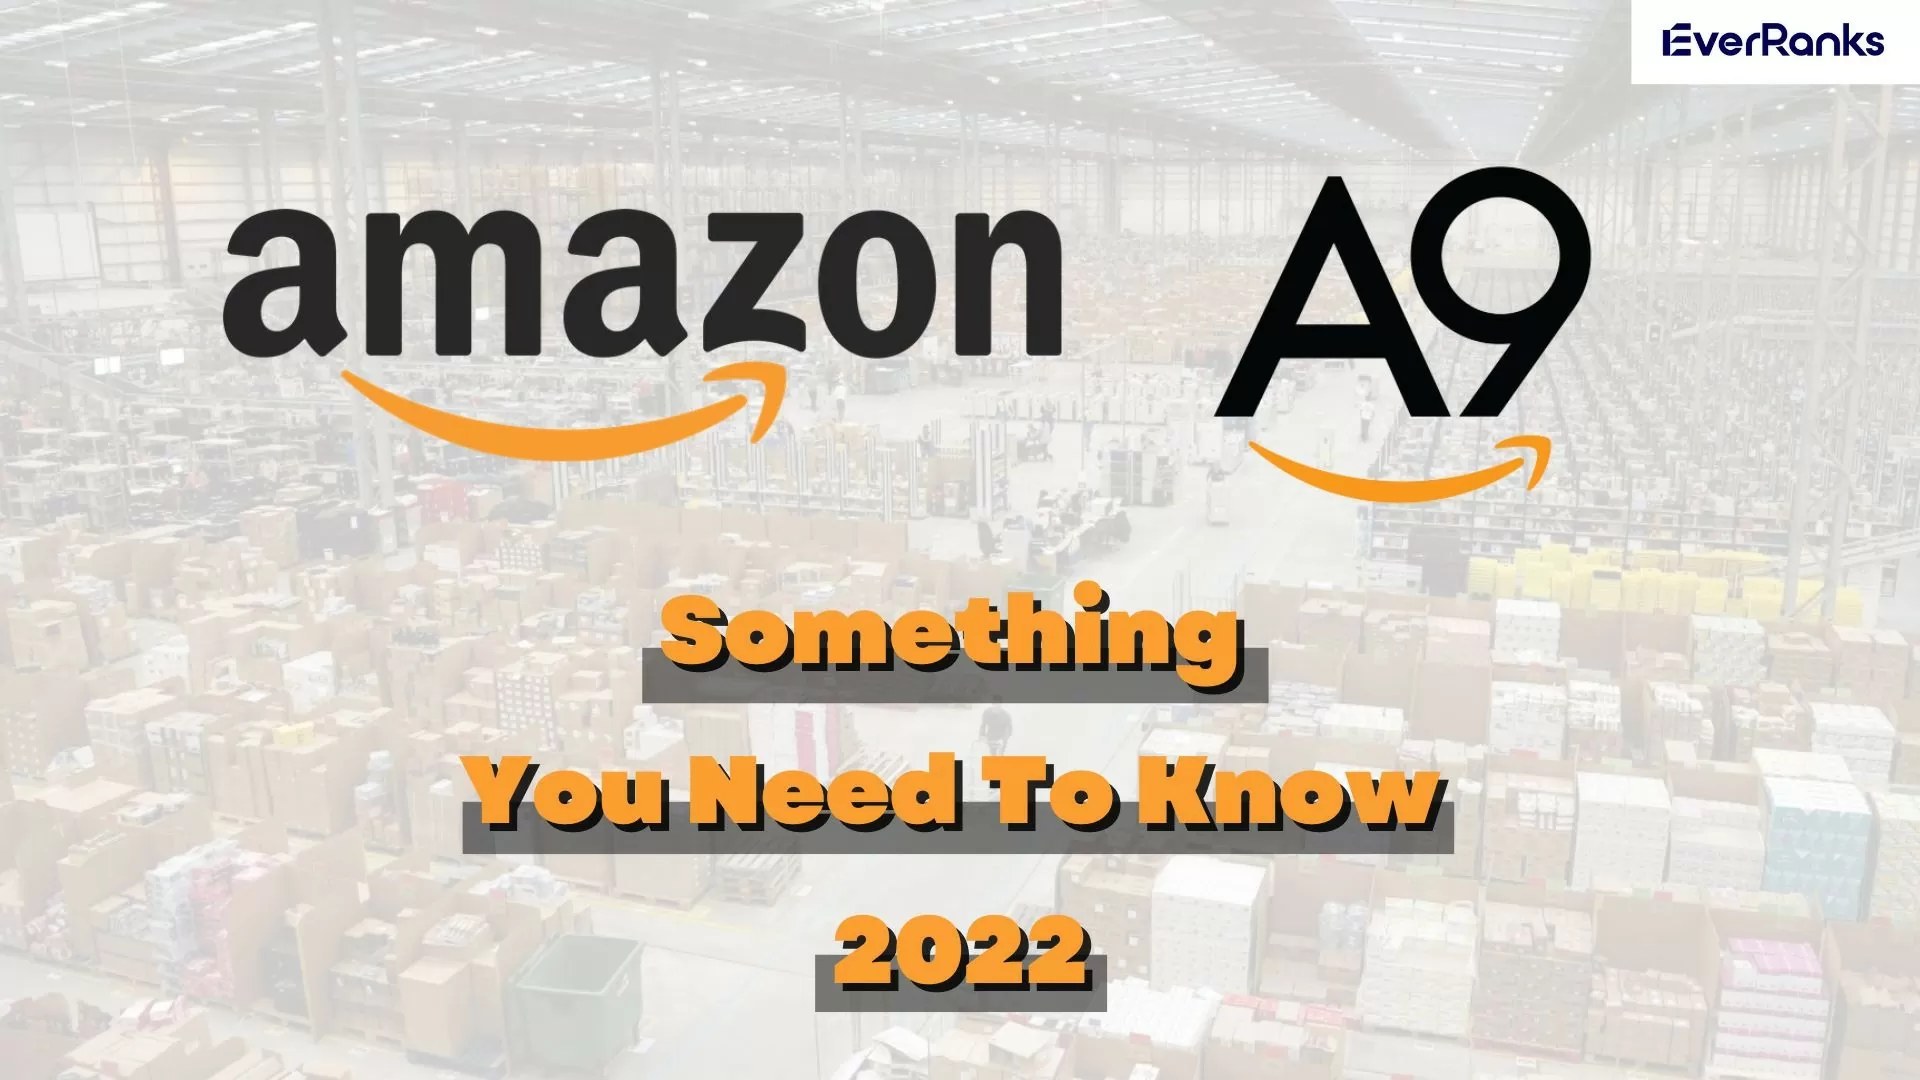 Amazon A9 Algorithm: Something You Need To Know 2022